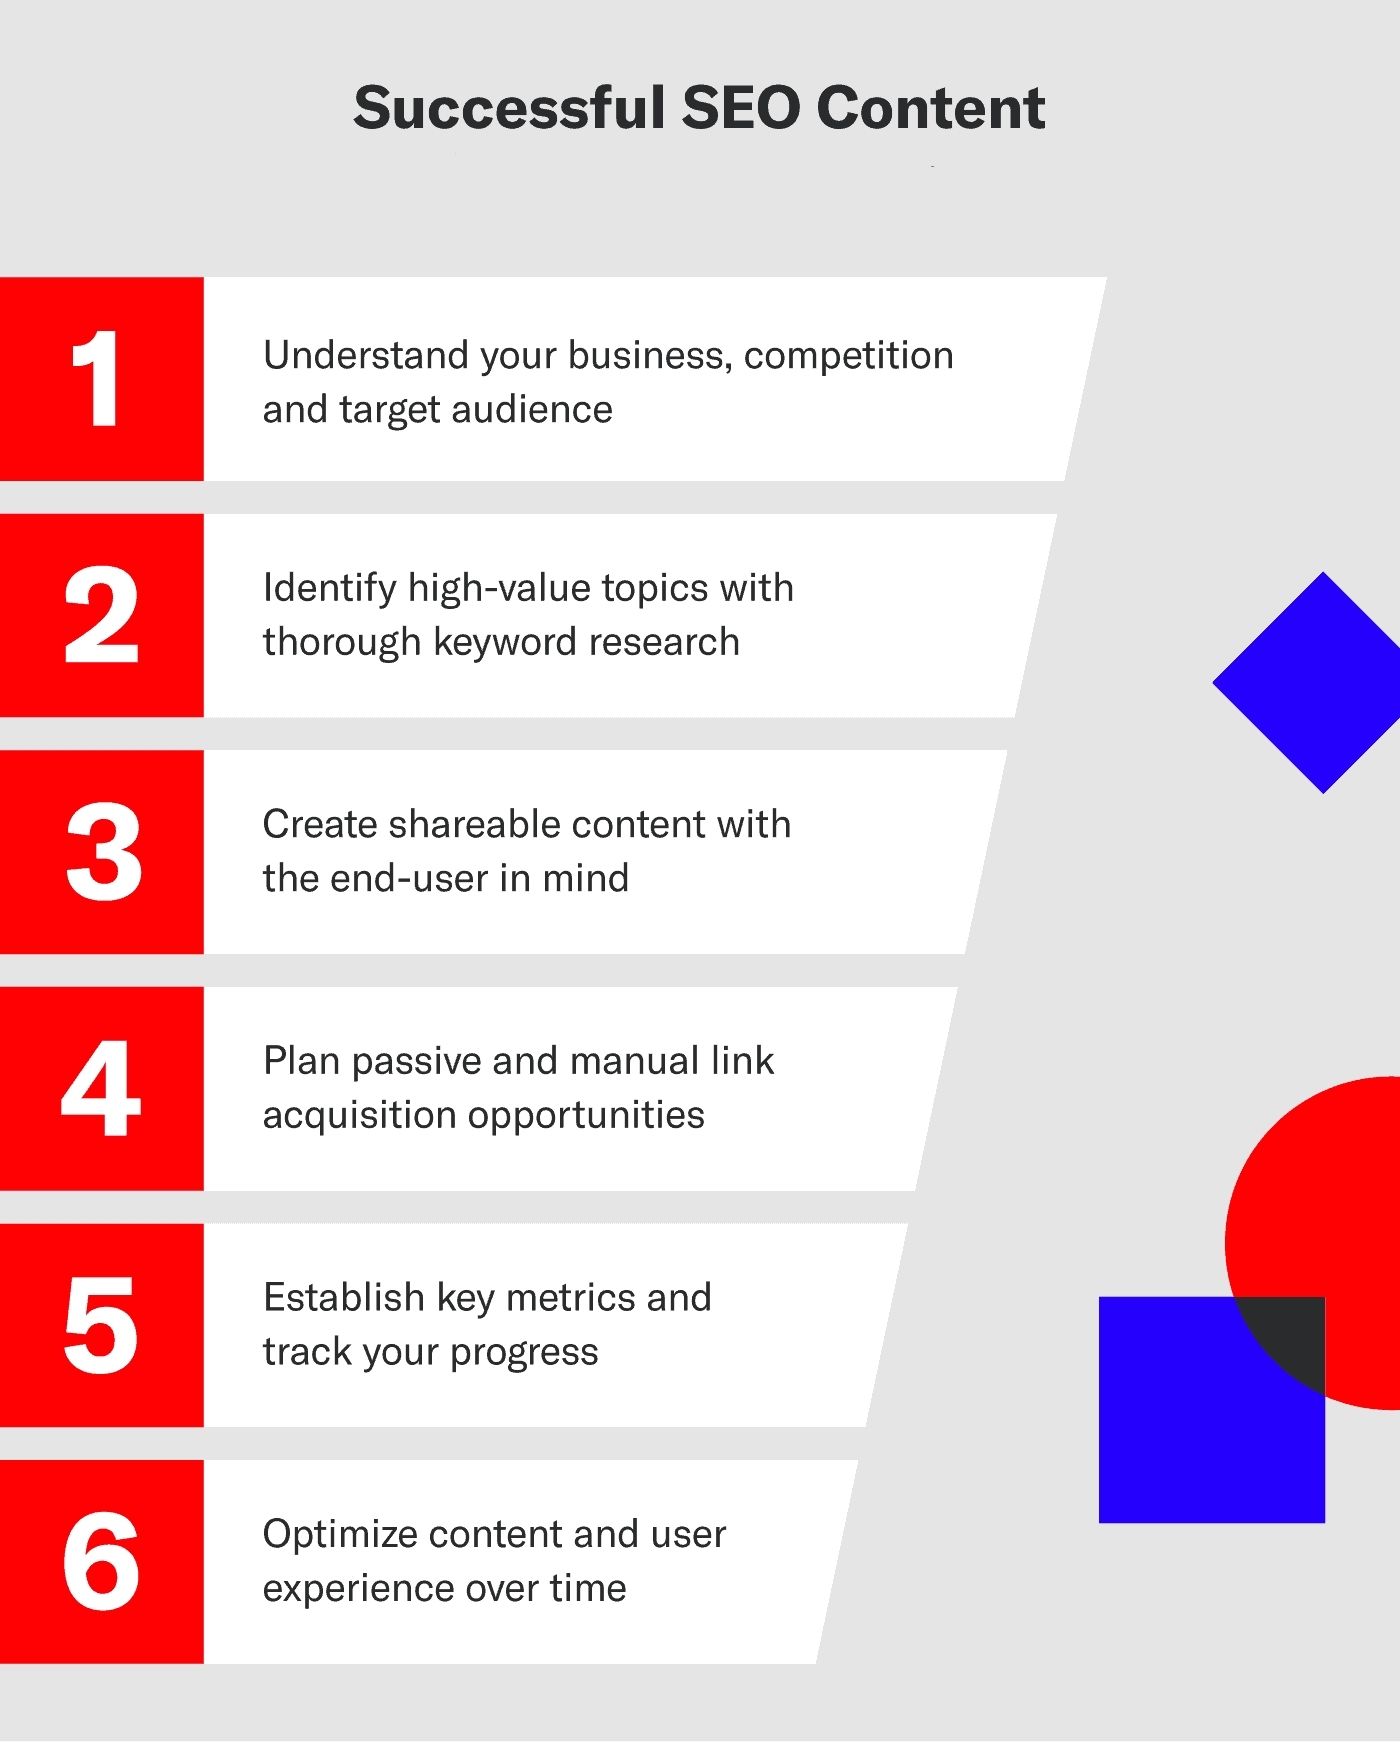 6 tips to successful SEO Content